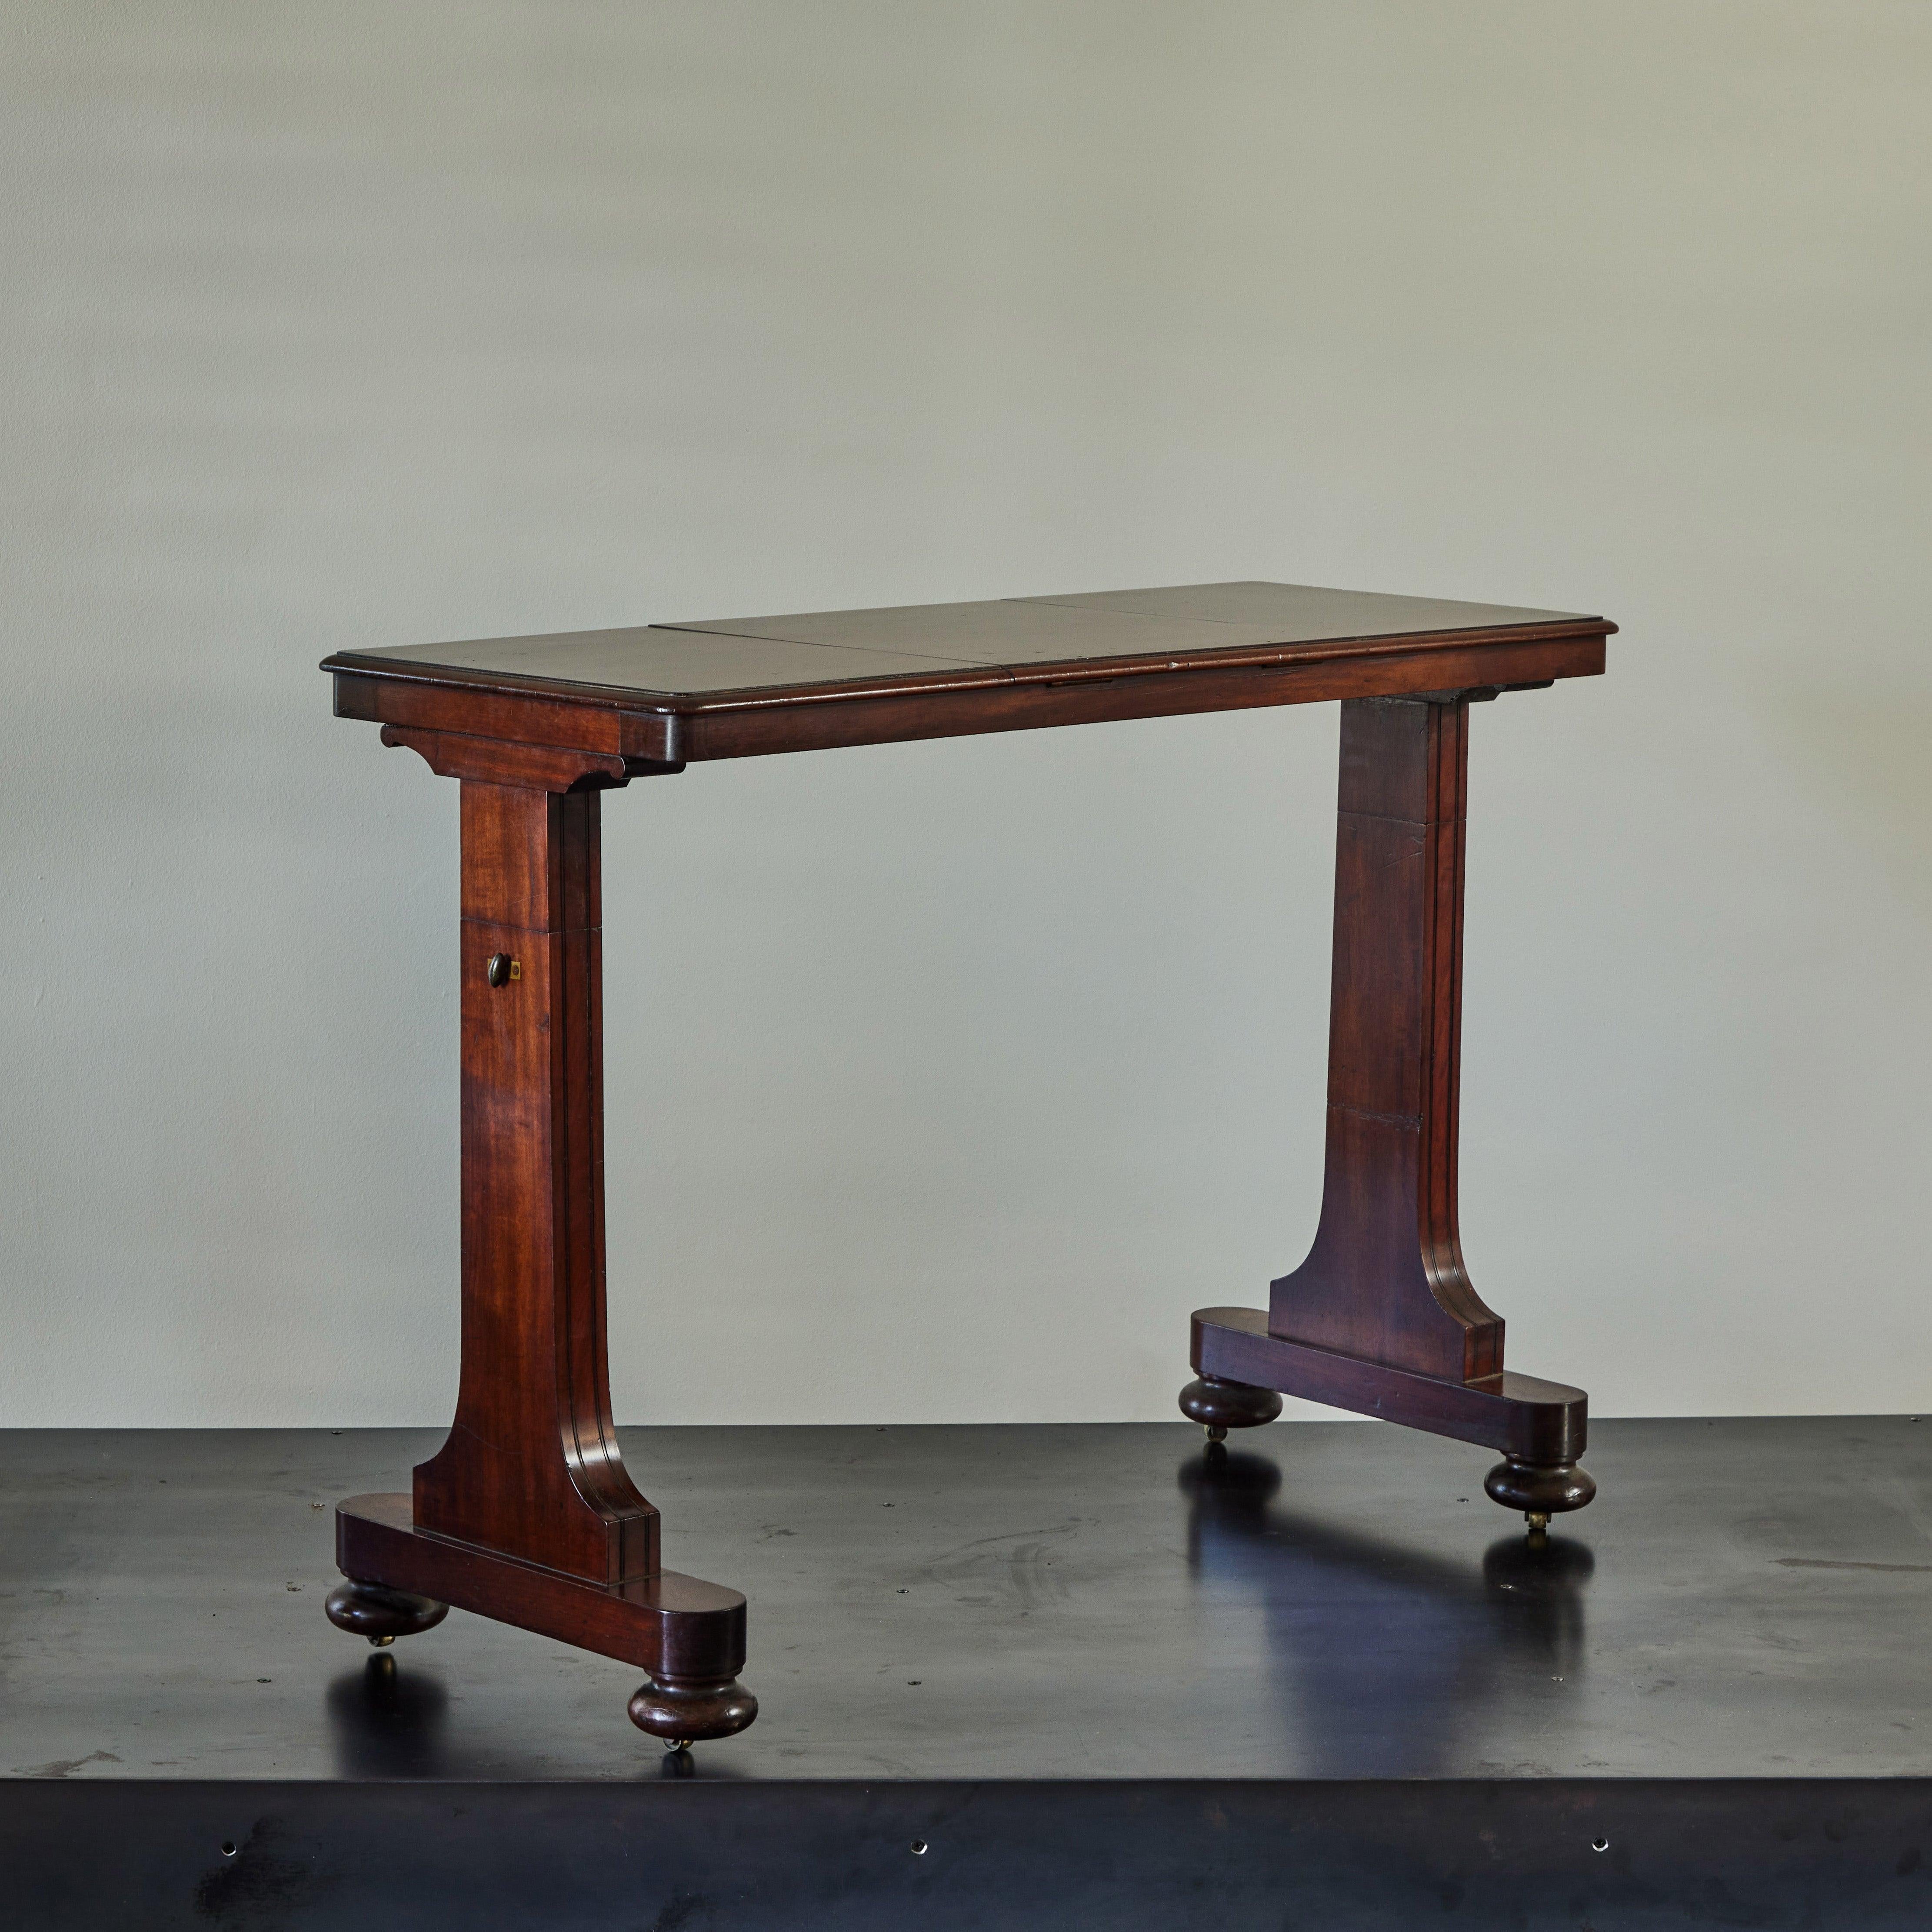 19th century English mahogany reading table. With its excellent proportions and charming function, this piece of Victorian craftsmanship could make a reader out of anyone. 

England, circa 1850

Dimensions: 40W x 15D x 31H.